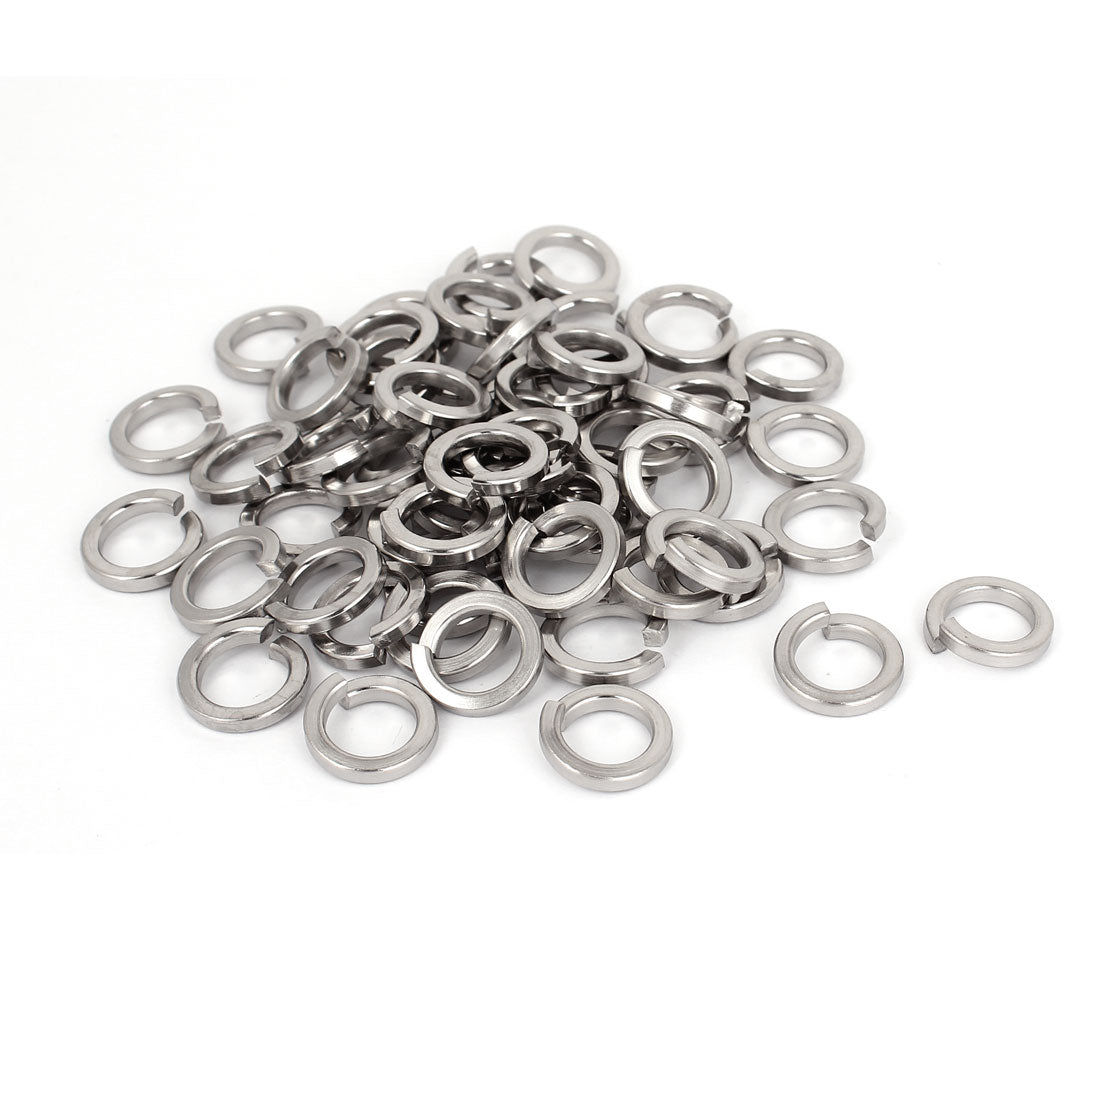 uxcell Uxcell 100pcs 316 Stainless Steel Split Lock Spring Washers 3/8" Screw Spacer Pad